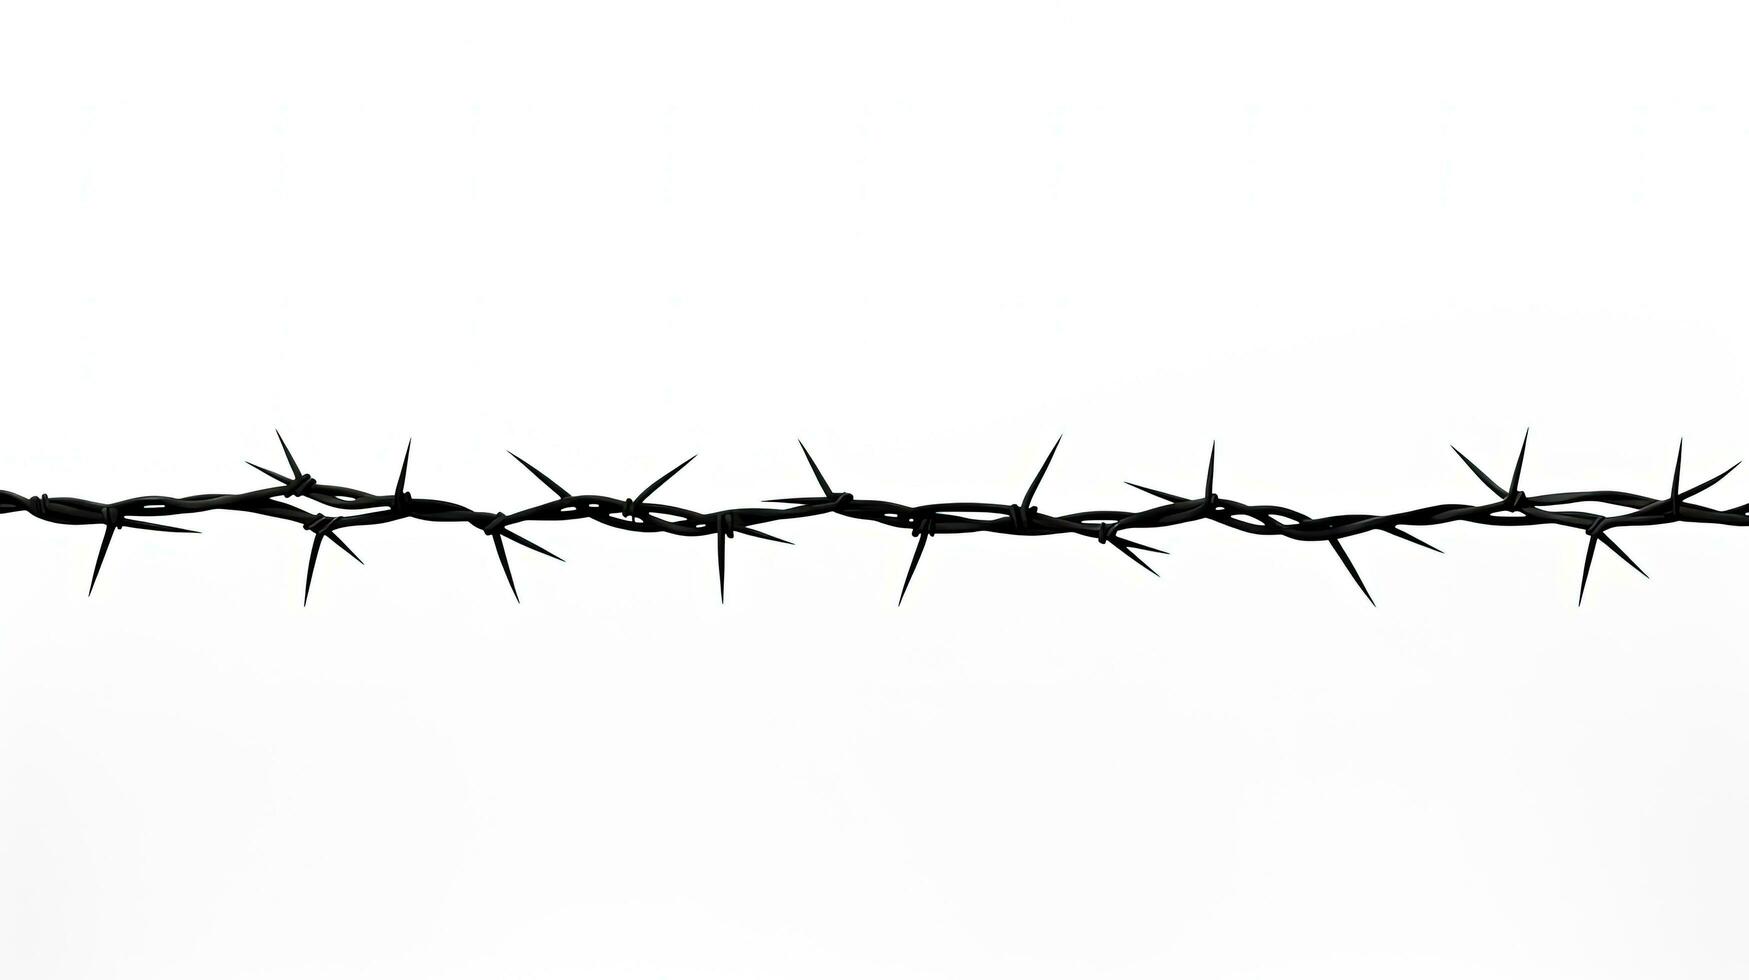 Isolated barb wire fence on white background. silhouette concept photo